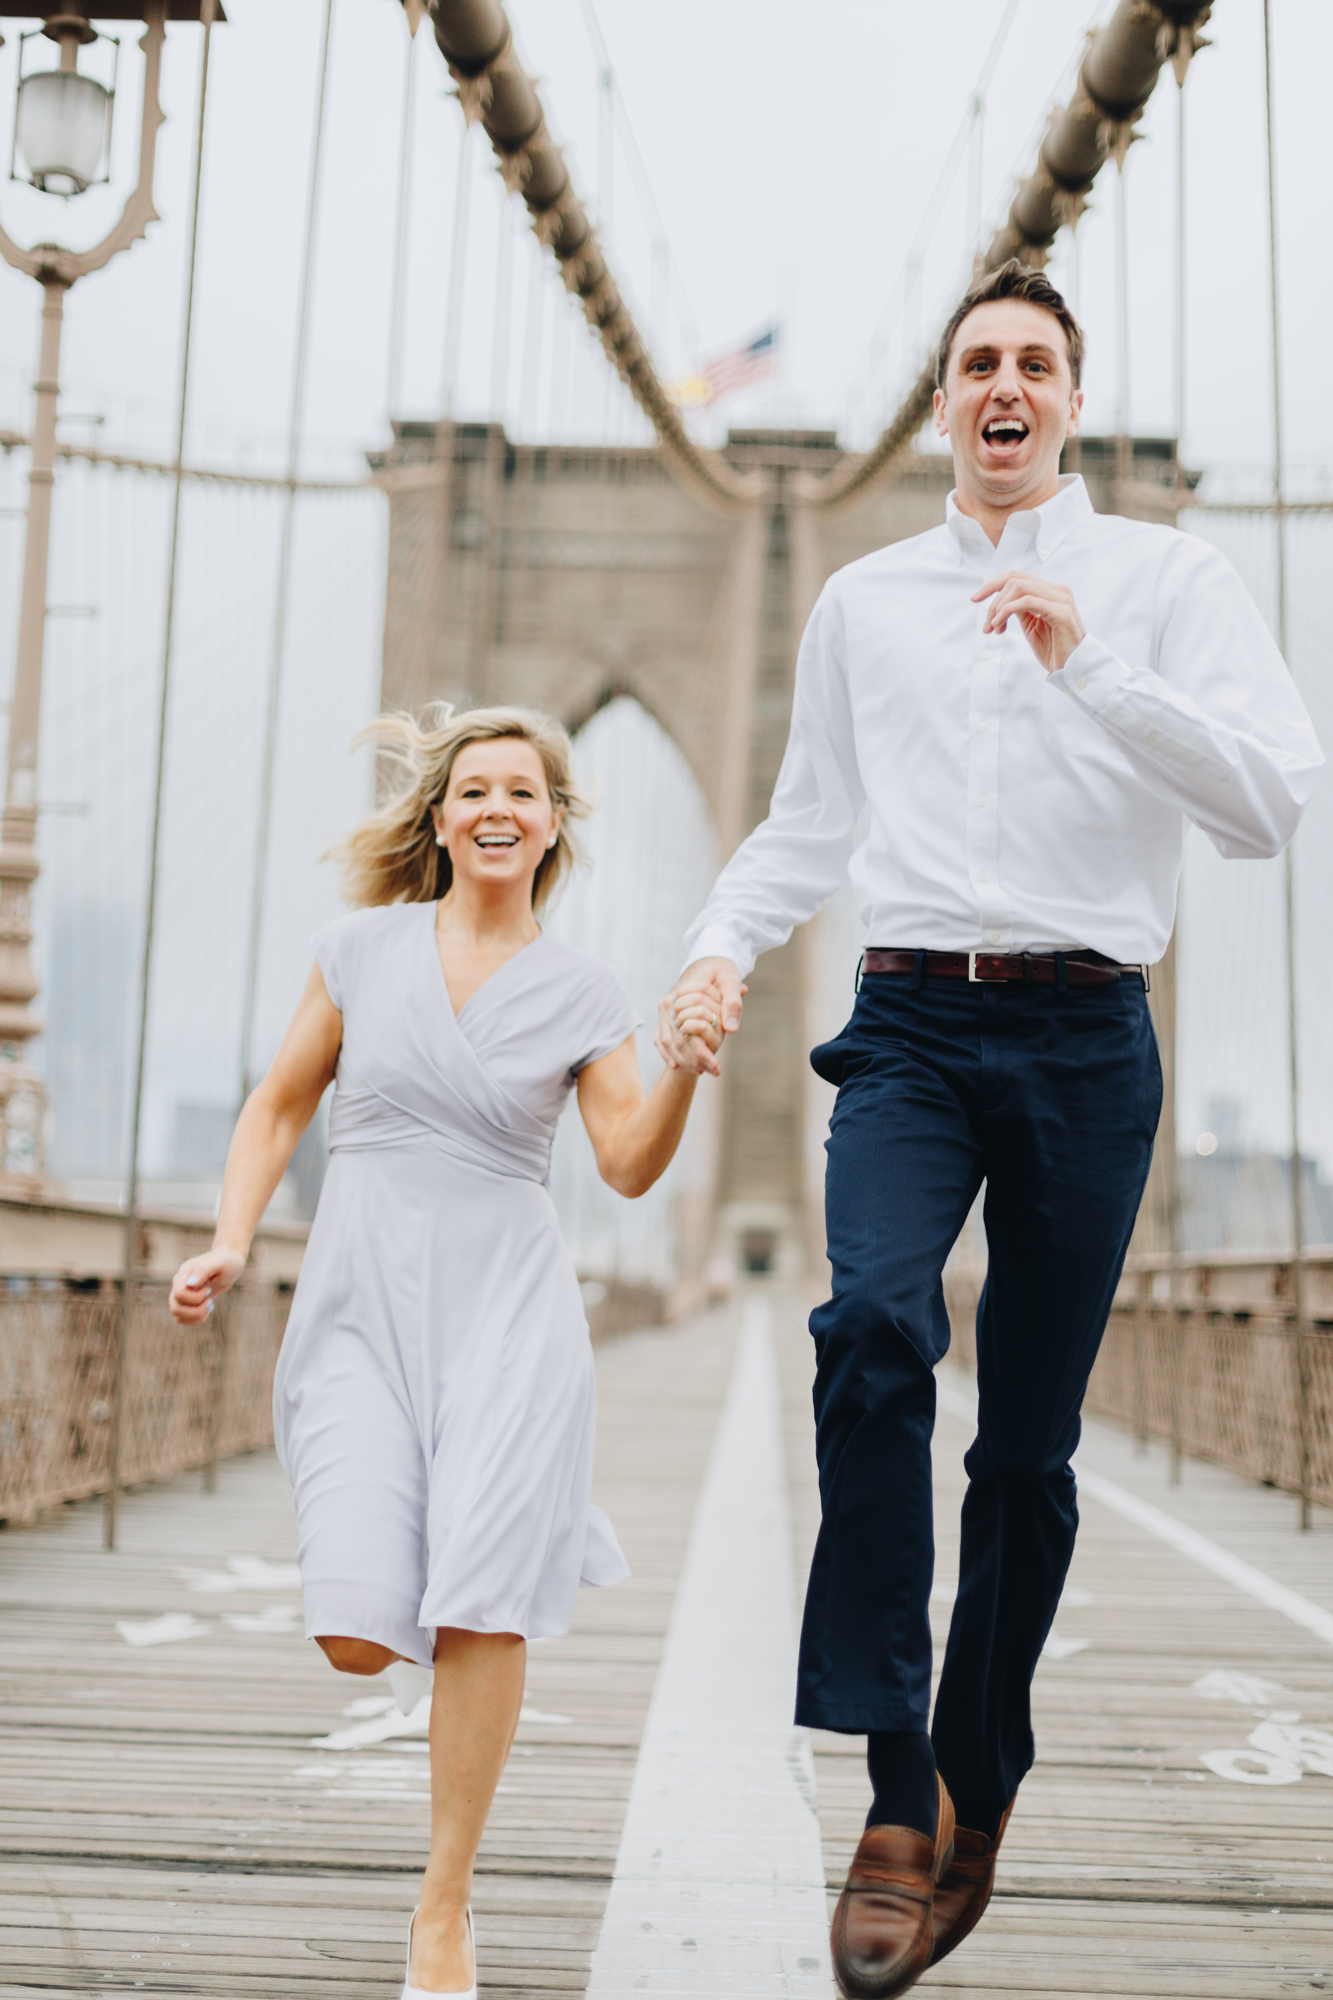 Fun Brooklyn Bridge Park Engagement Photos on a Cloudy Day in New York